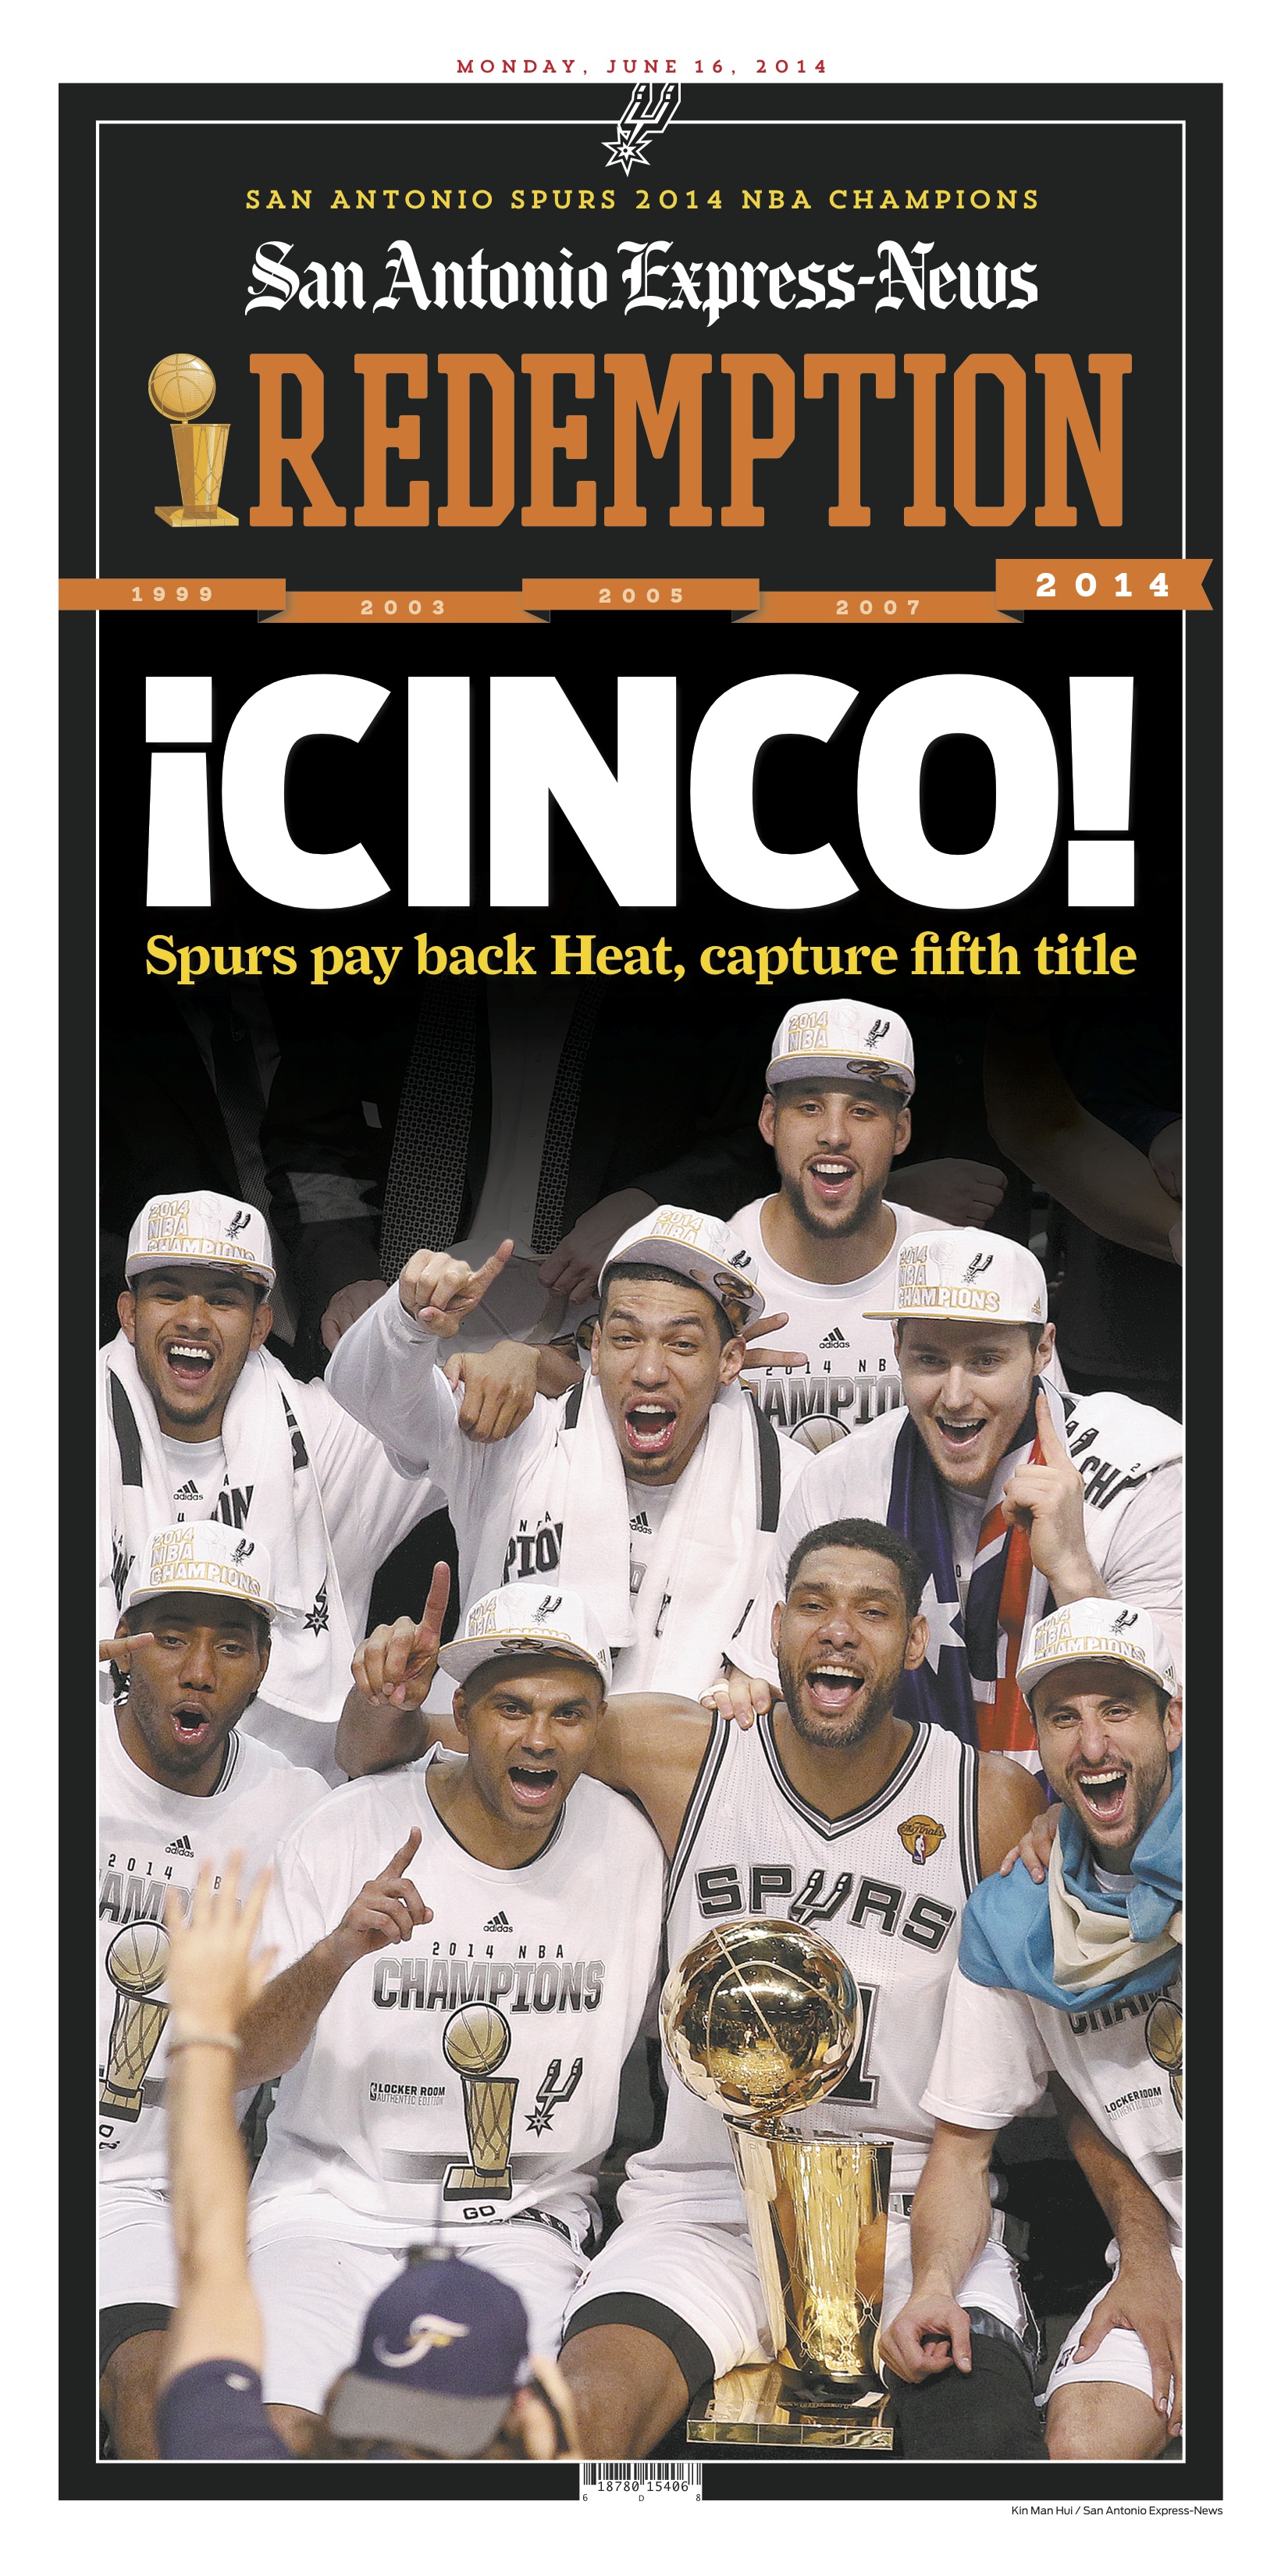 Framed San Antonio Express News Spurs Redemption 2014 NBA Finals Champions  17x27 Basketball Newspaper Cover Photo Professionally Matted at 's  Sports Collectibles Store